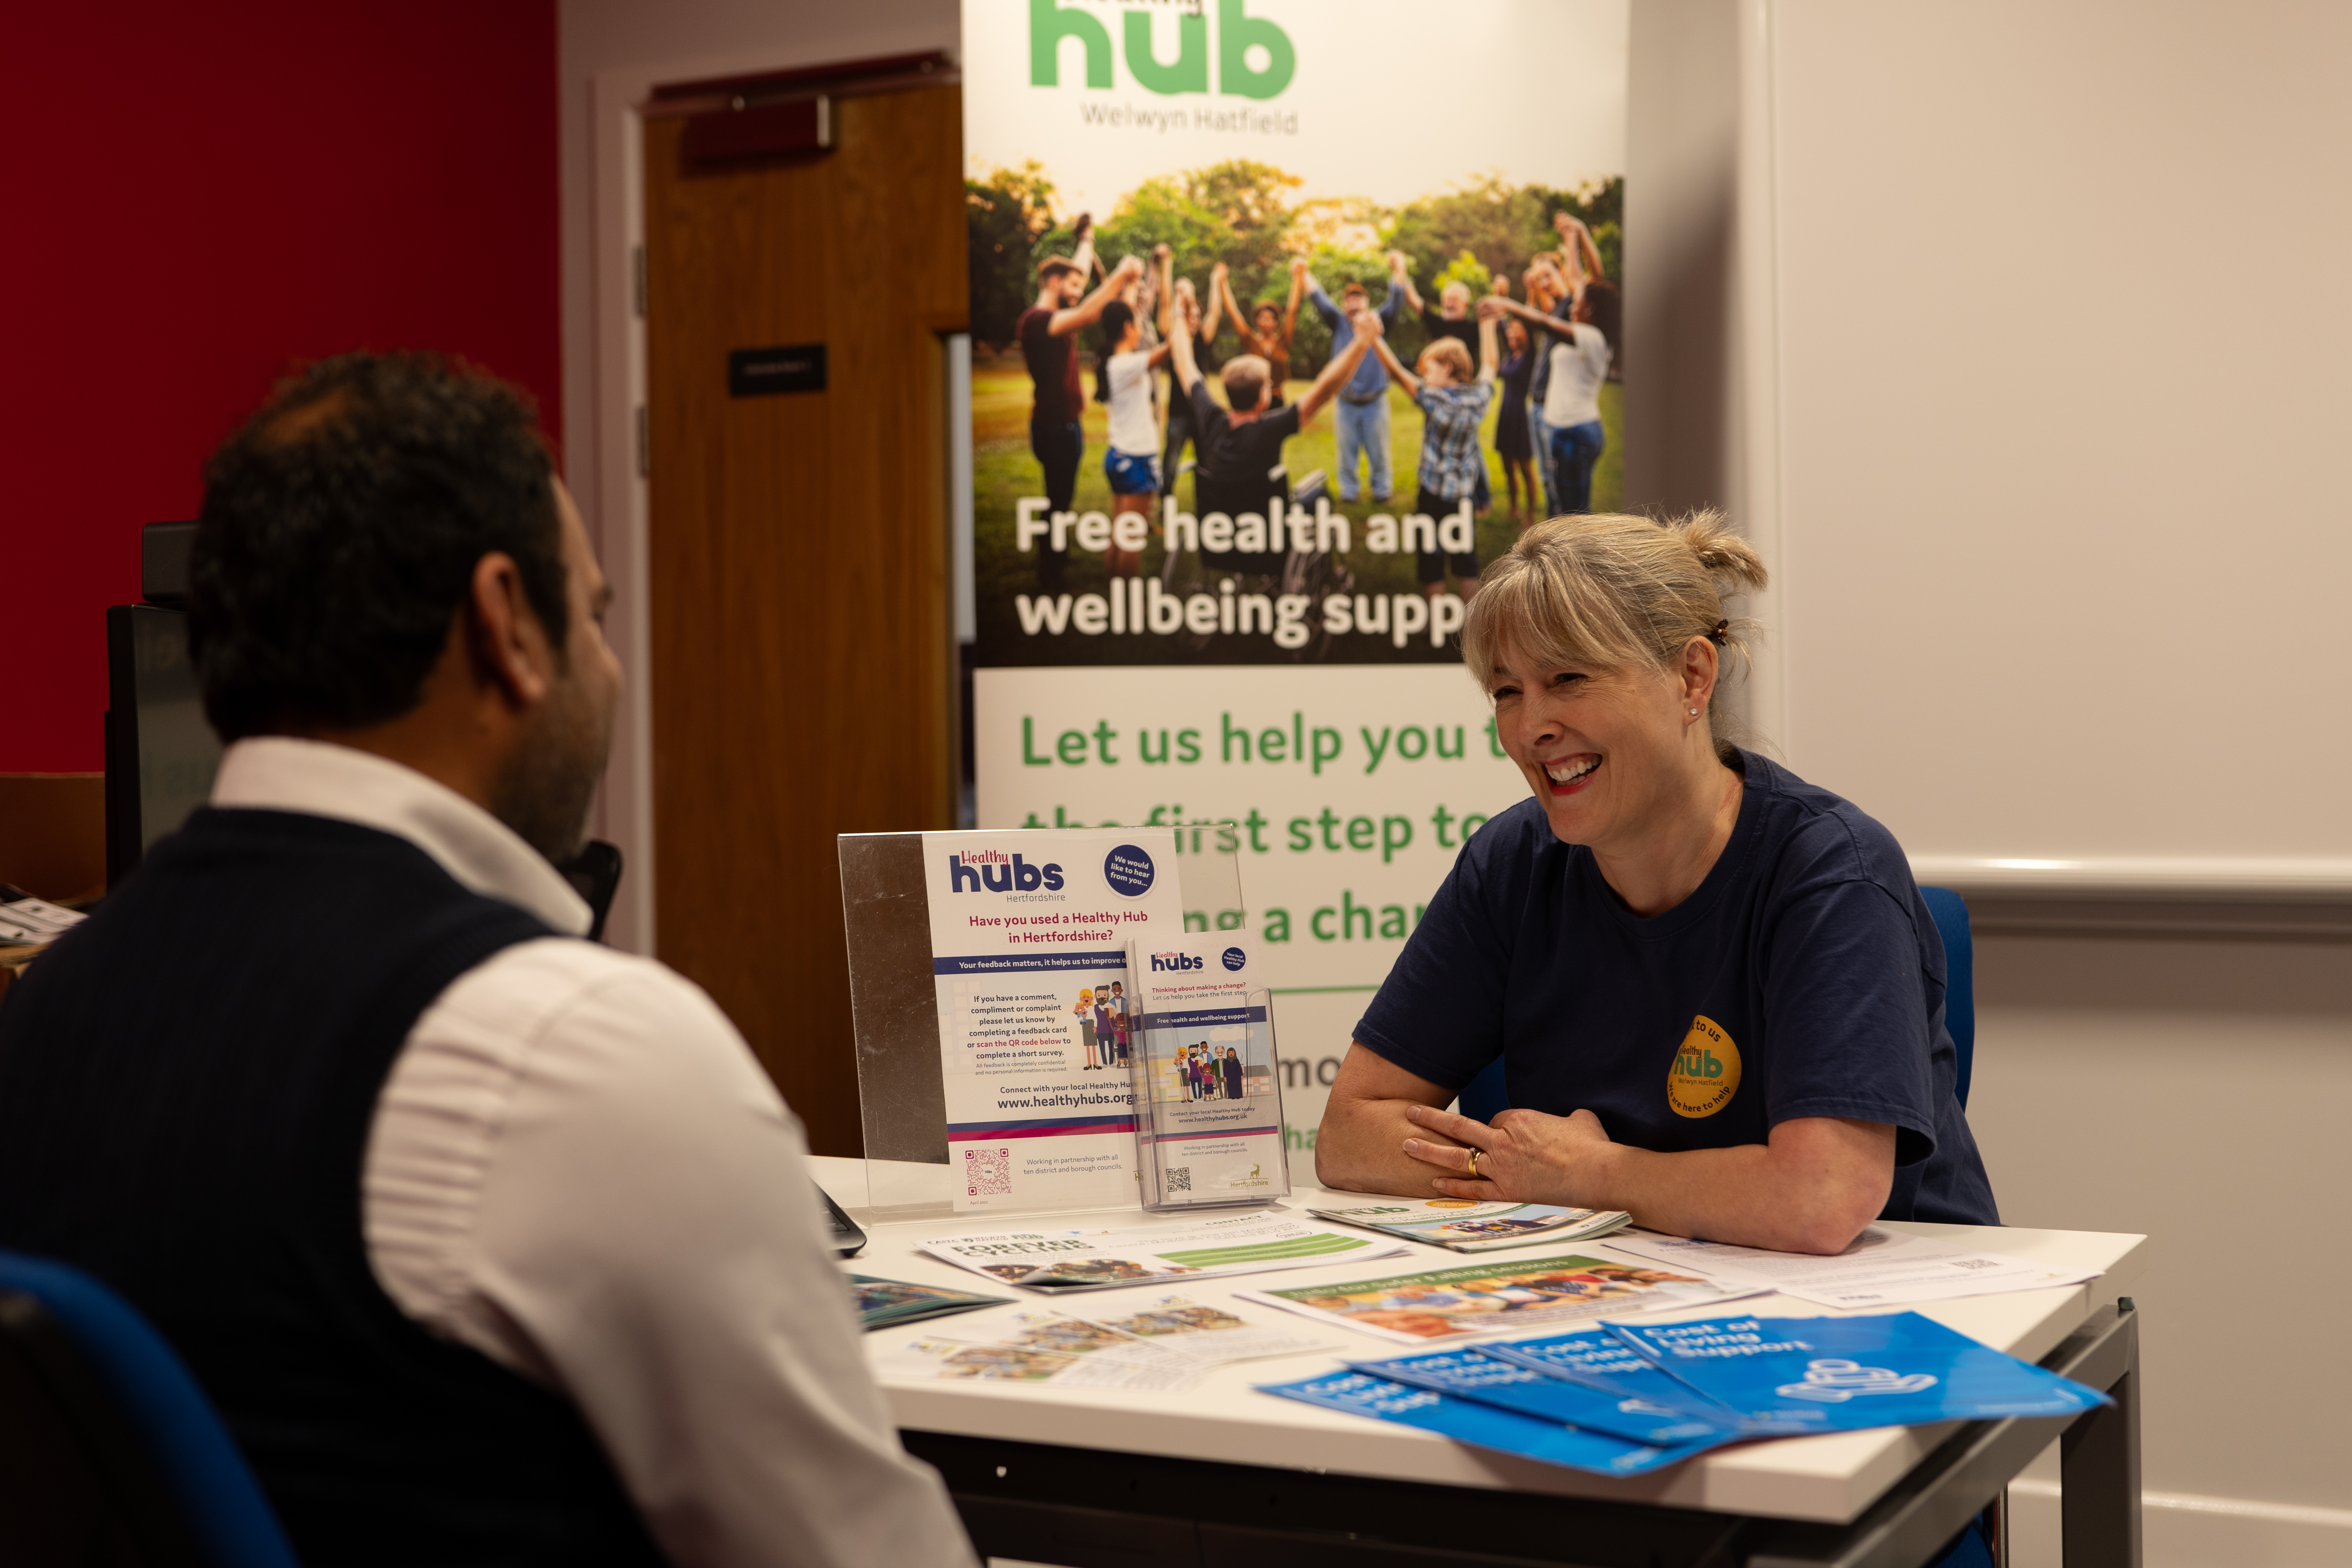 Liz from the Healthy Hub team talking to a gentleman.